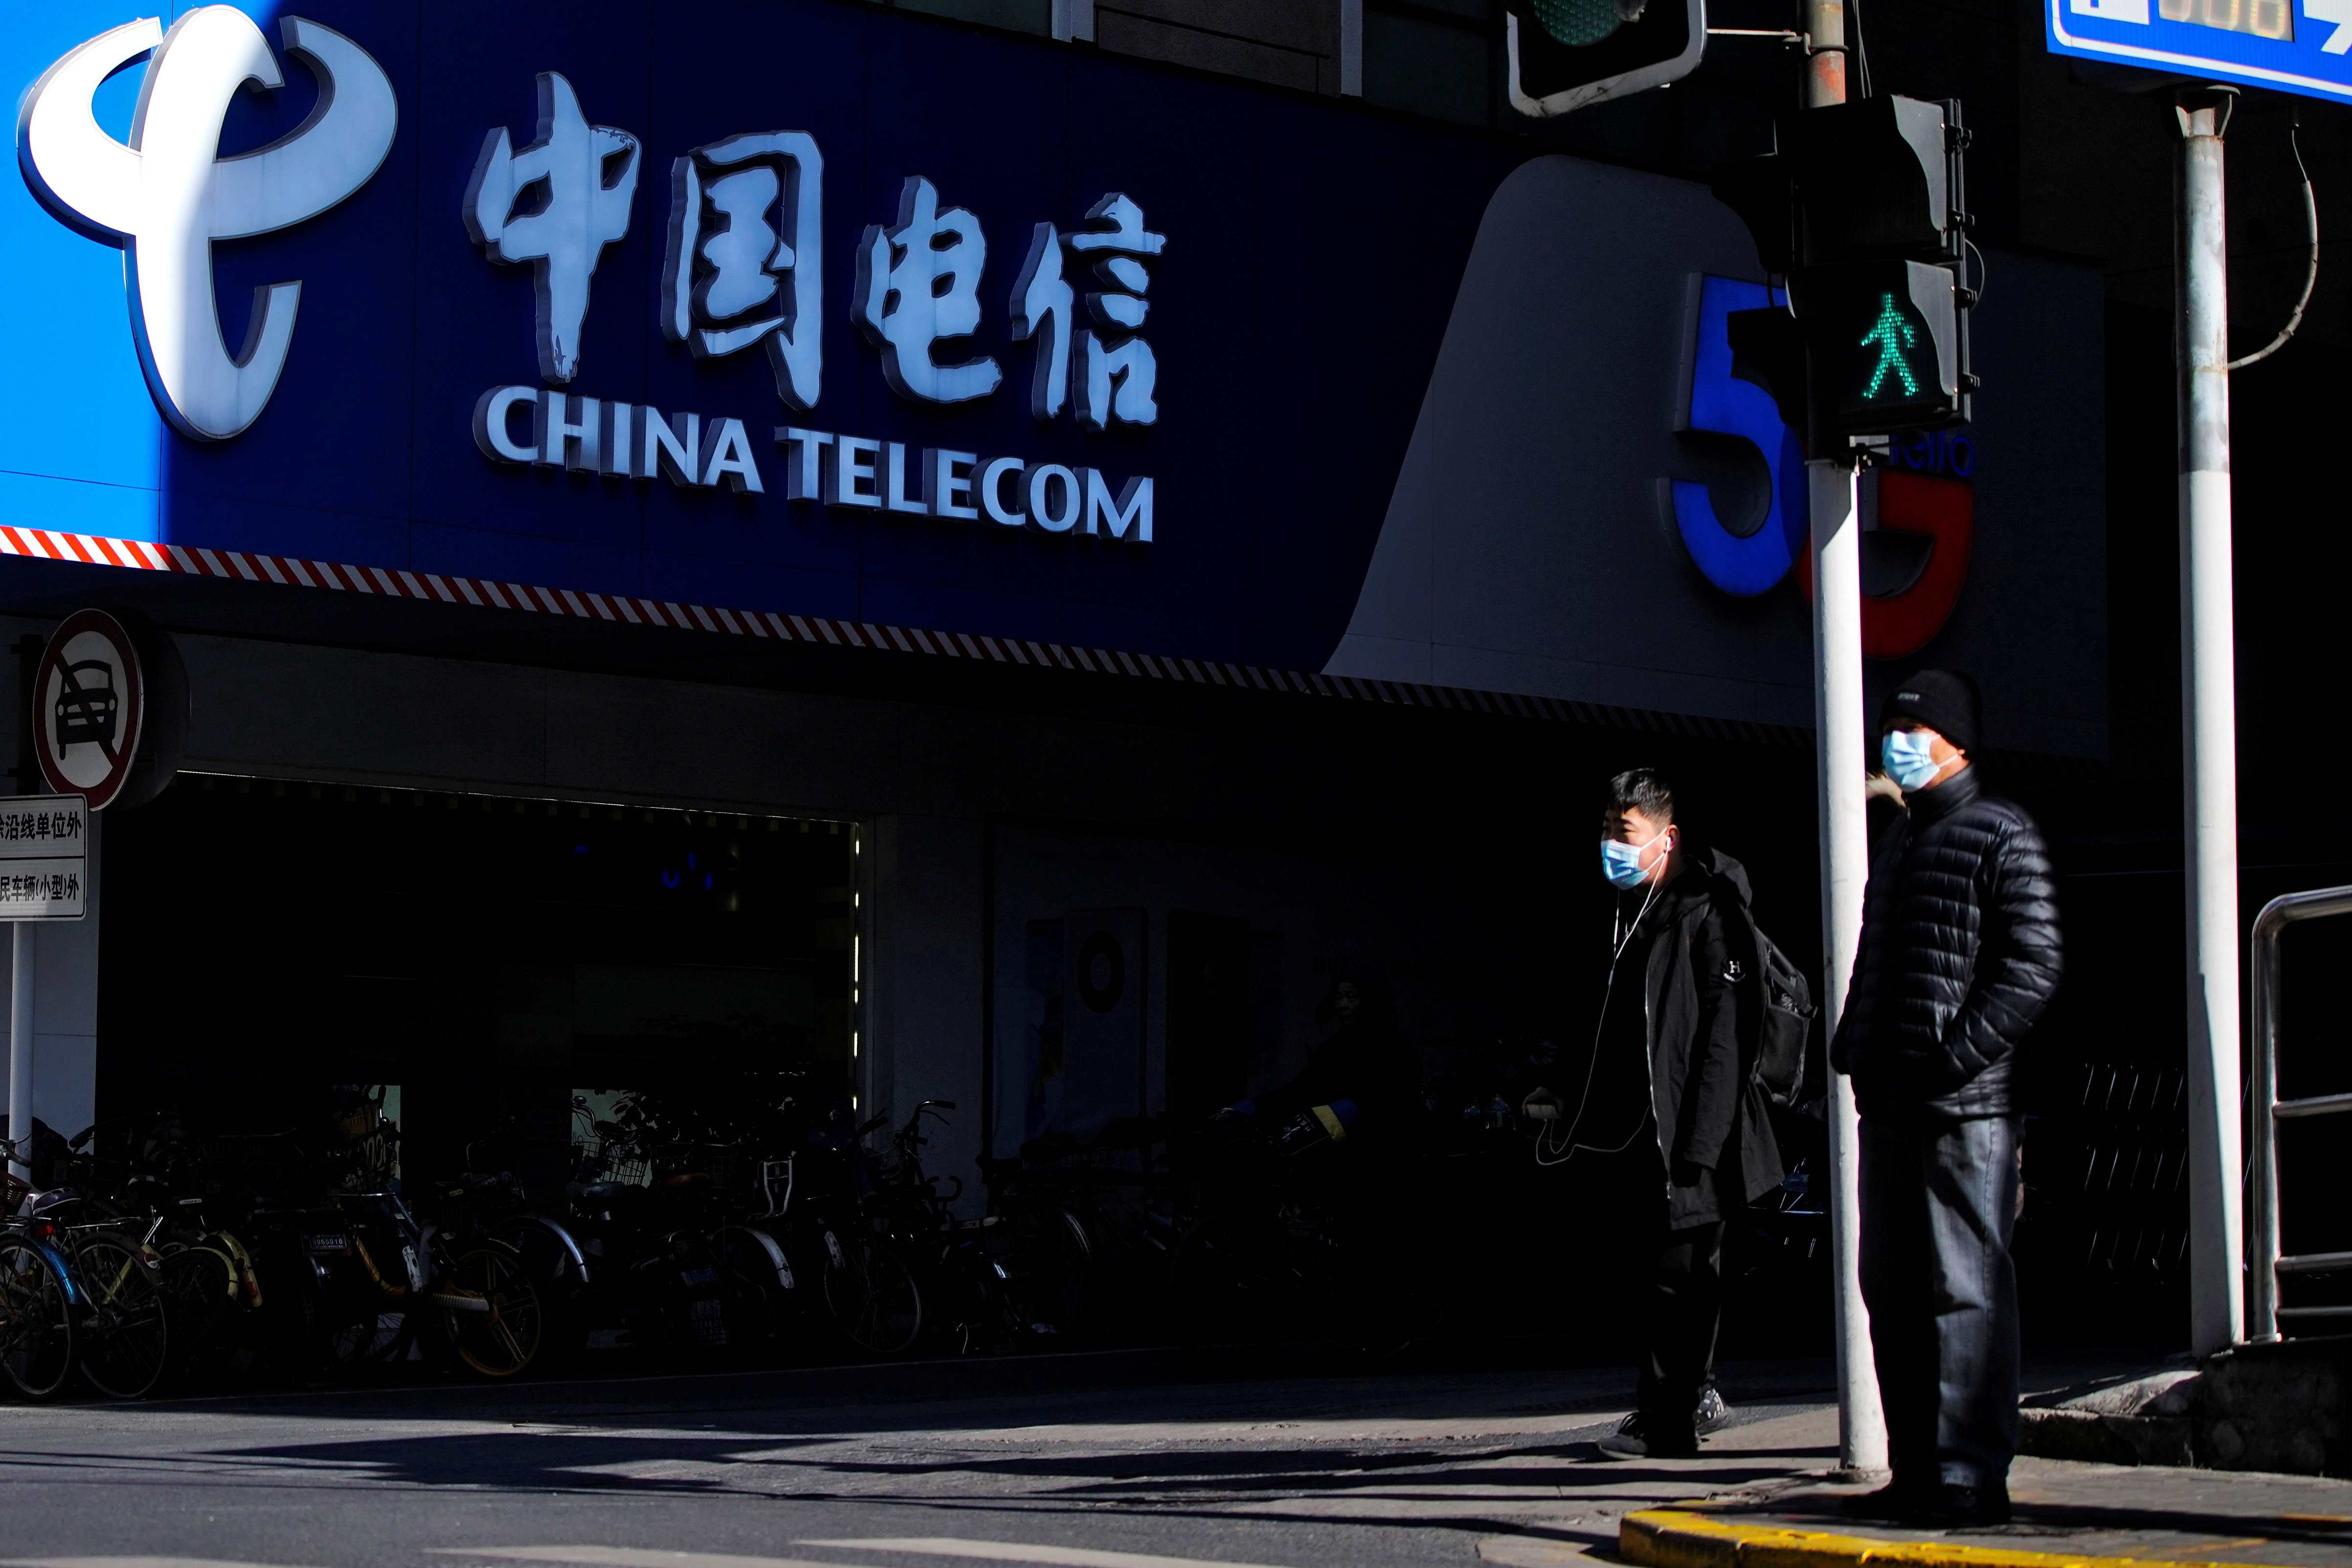 A sign of China Telecom is seen on a street, during the coronavirus disease (COVID-19) outbreak in Shanghai